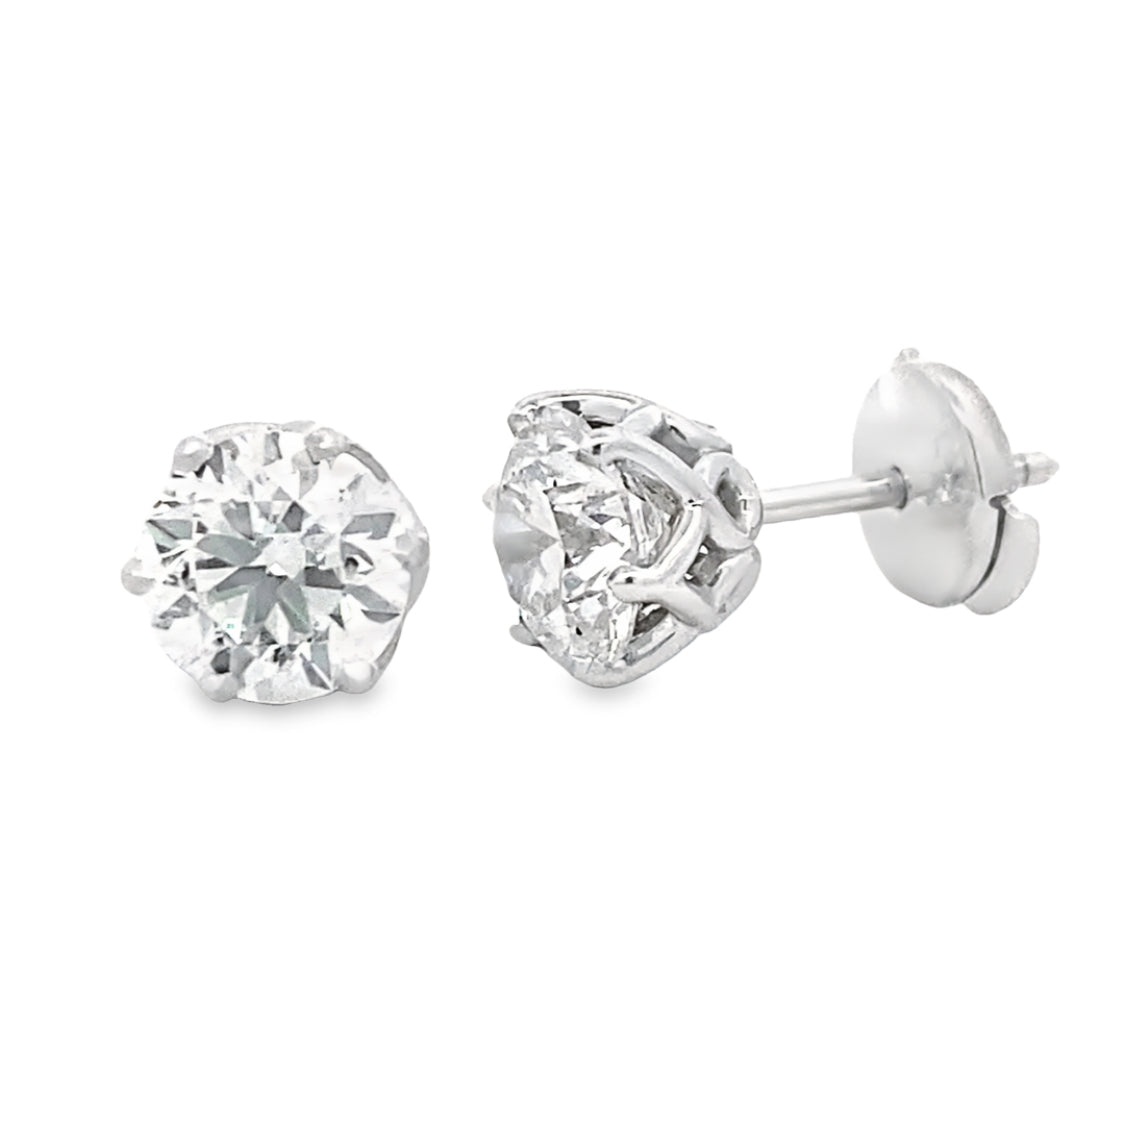 Beeghly & Co. "Best Collection"18 KT White Goldt 3CTW Diamond Stud Earrings